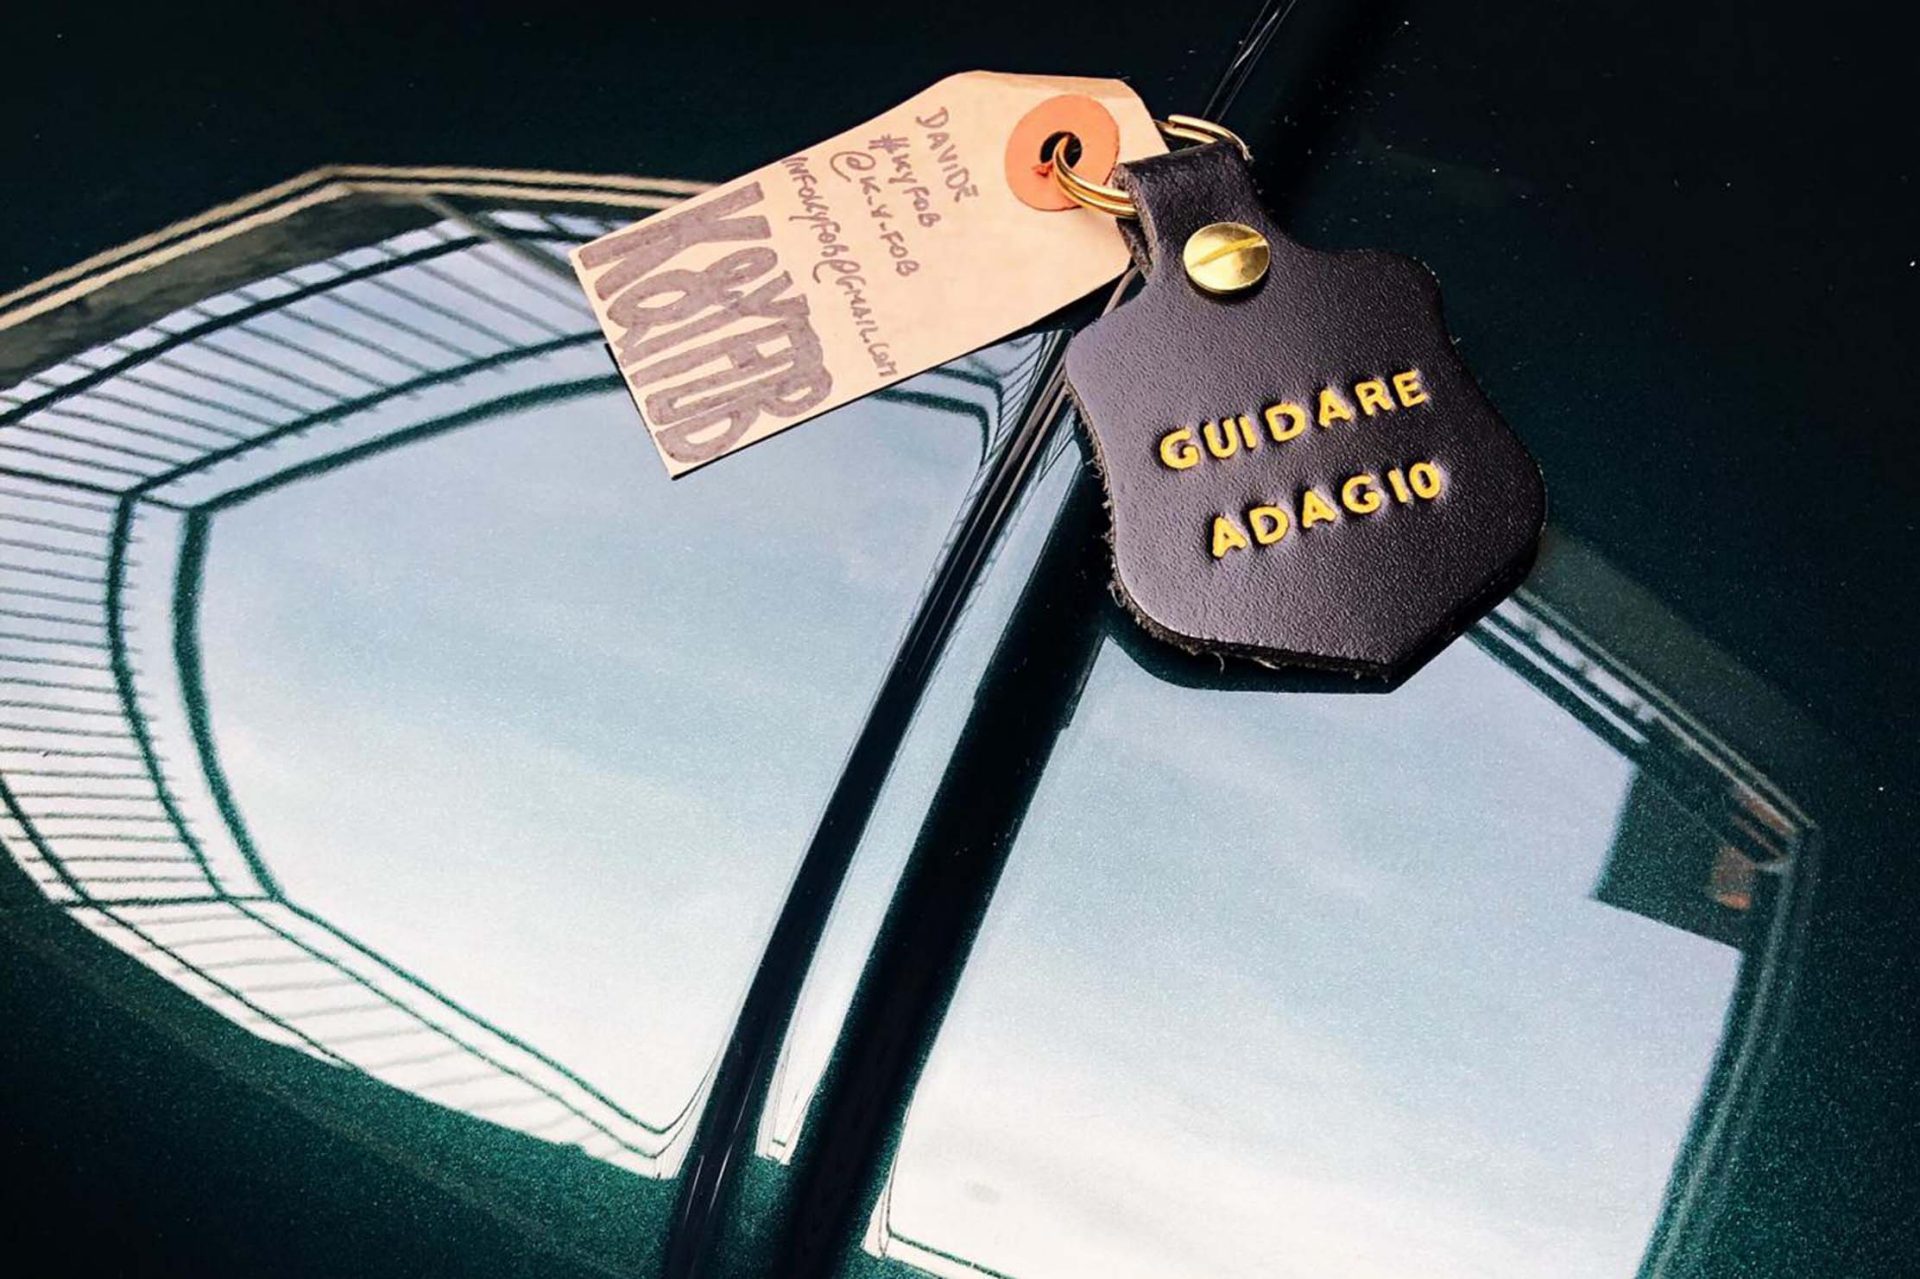 A one-off item, handmade in Monza. K&YFOB key fobs are the polar opposite of mass-produced. The inscription here (“Drive carefully” in English) acts as a reminder to go easy on this vintage Mini each time you start it up.